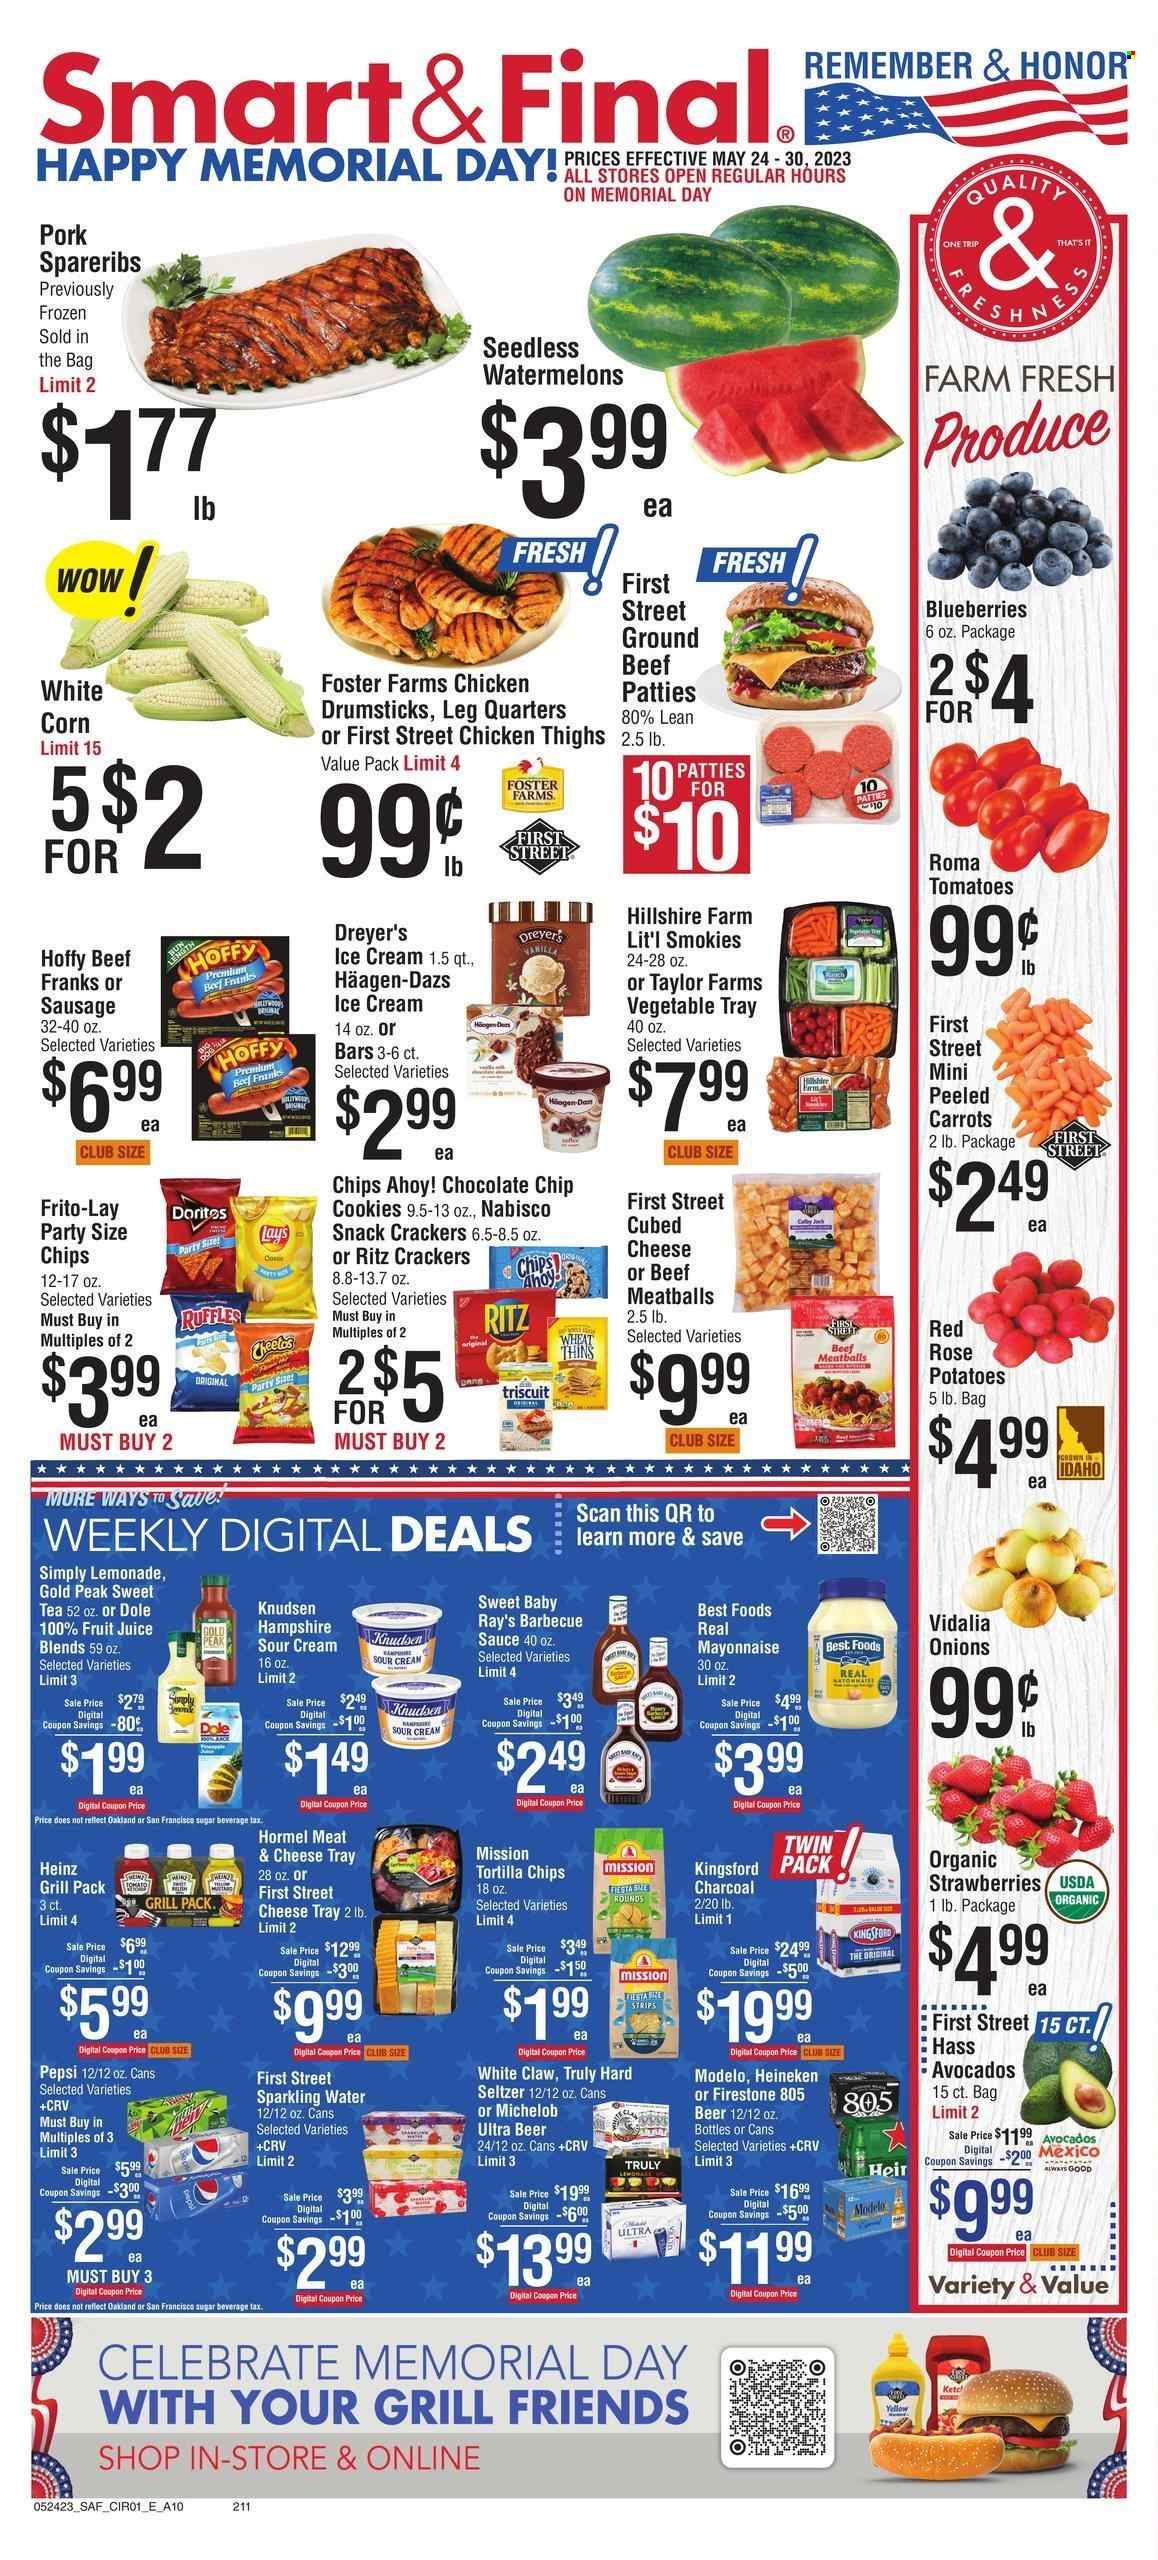 thumbnail - Smart & Final Flyer - 05/24/2023 - 05/30/2023 - Sales products - carrots, corn, tomatoes, potatoes, onion, Dole, avocado, blueberries, strawberries, watermelon, meatballs, sauce, Hormel, Kingsford, Hillshire Farm, sausage, frankfurters, sour cream, mayonnaise, ice cream, Häagen-Dazs, strips, cookies, chocolate chips, snack, crackers, Chips Ahoy!, RITZ, Nabisco, Doritos, tortilla chips, Cheetos, Lay’s, Thins, Frito-Lay, Ruffles, salty snack, sugar, Heinz, BBQ sauce, lemonade, Pepsi, juice, fruit juice, soft drink, sparkling water, water, tea, alcohol, White Claw, Hard Seltzer, TRULY, beer, Heineken, Modelo, chicken thighs, chicken drumsticks, chicken, beef meat, ground beef, pork spare ribs, rose, Michelob. Page 1.